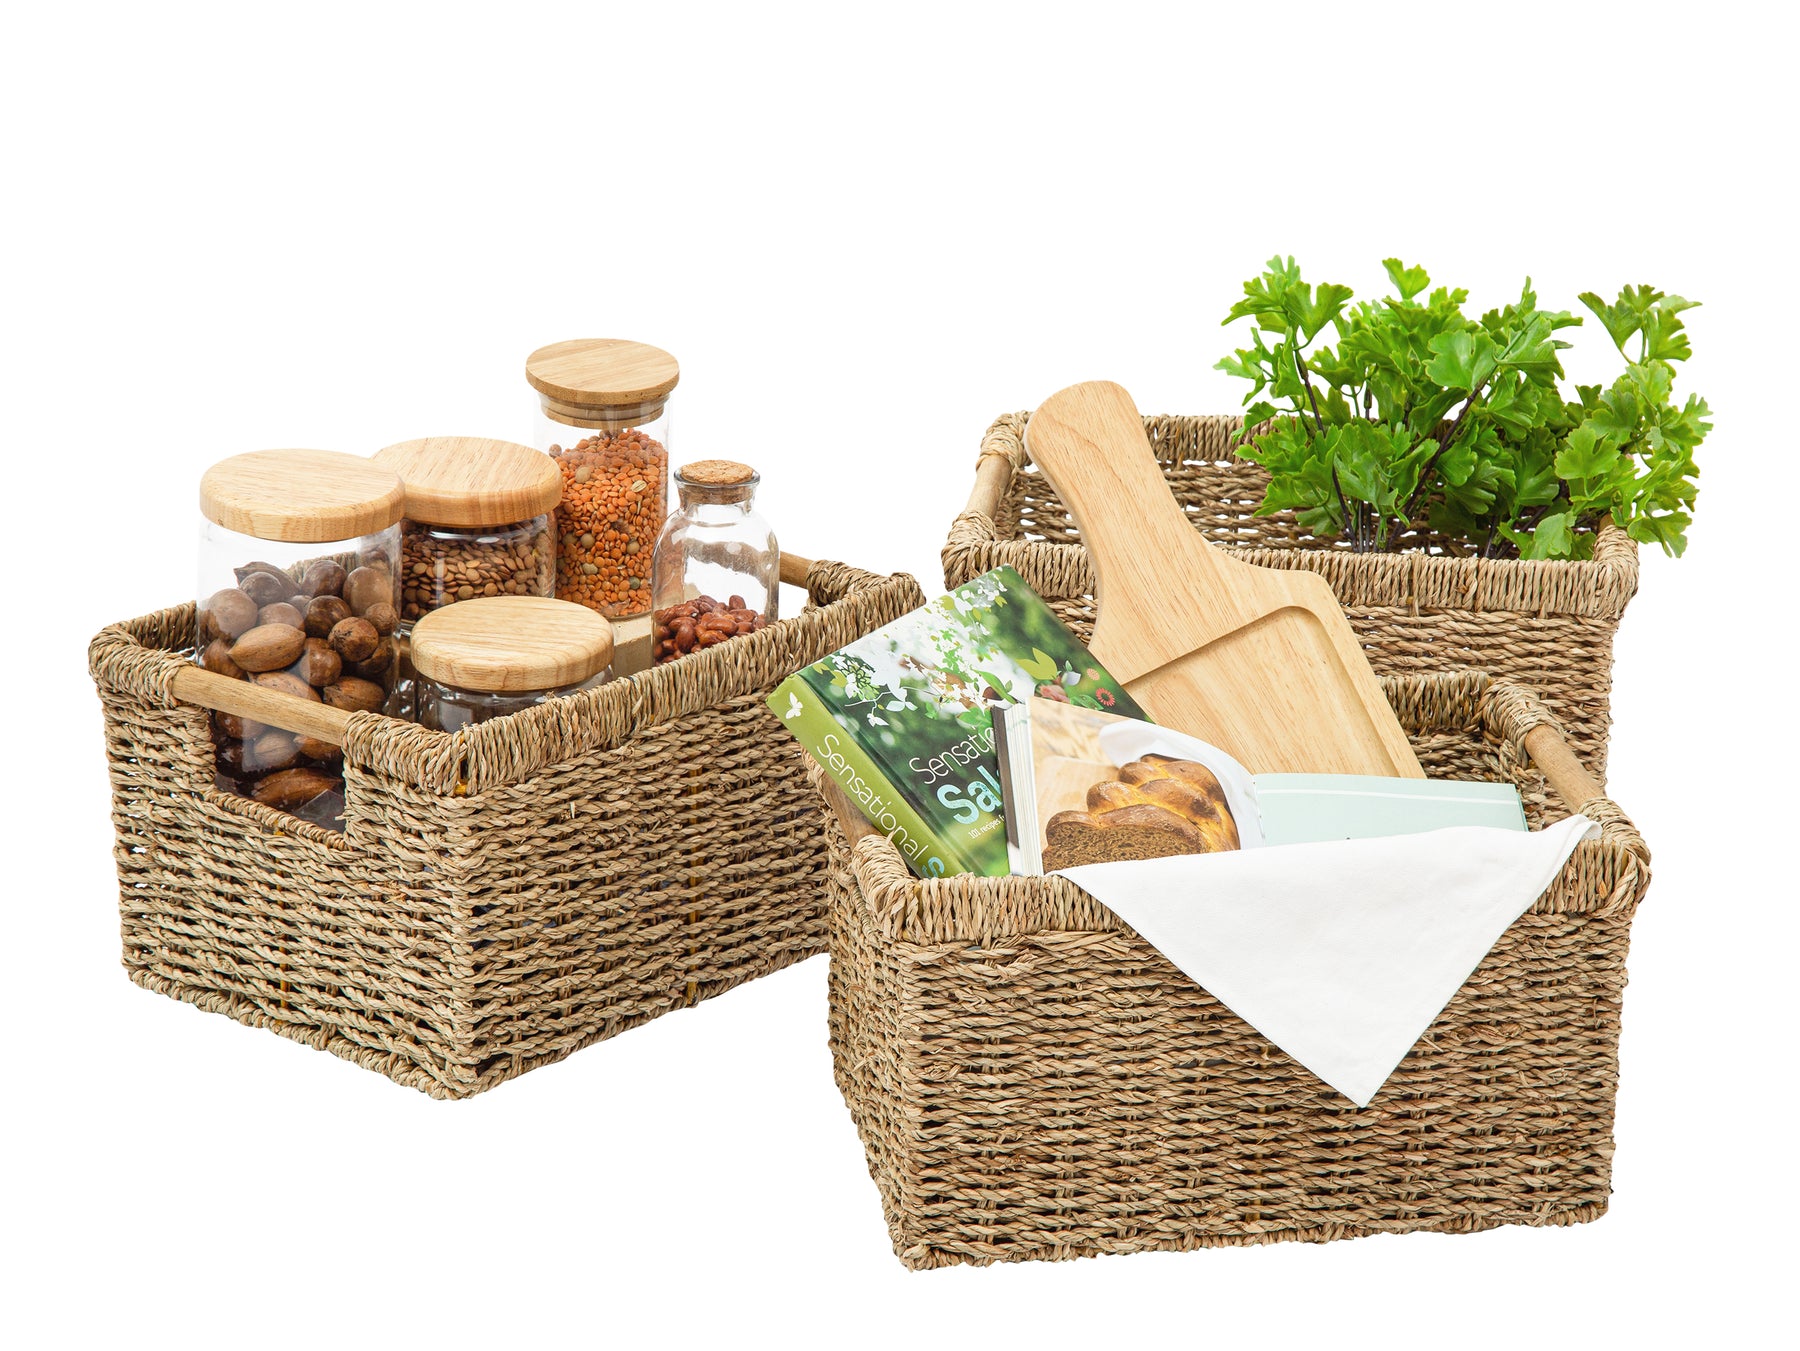 The Benefits of Seagrass Baskets: Why They're a Sustainable Choice